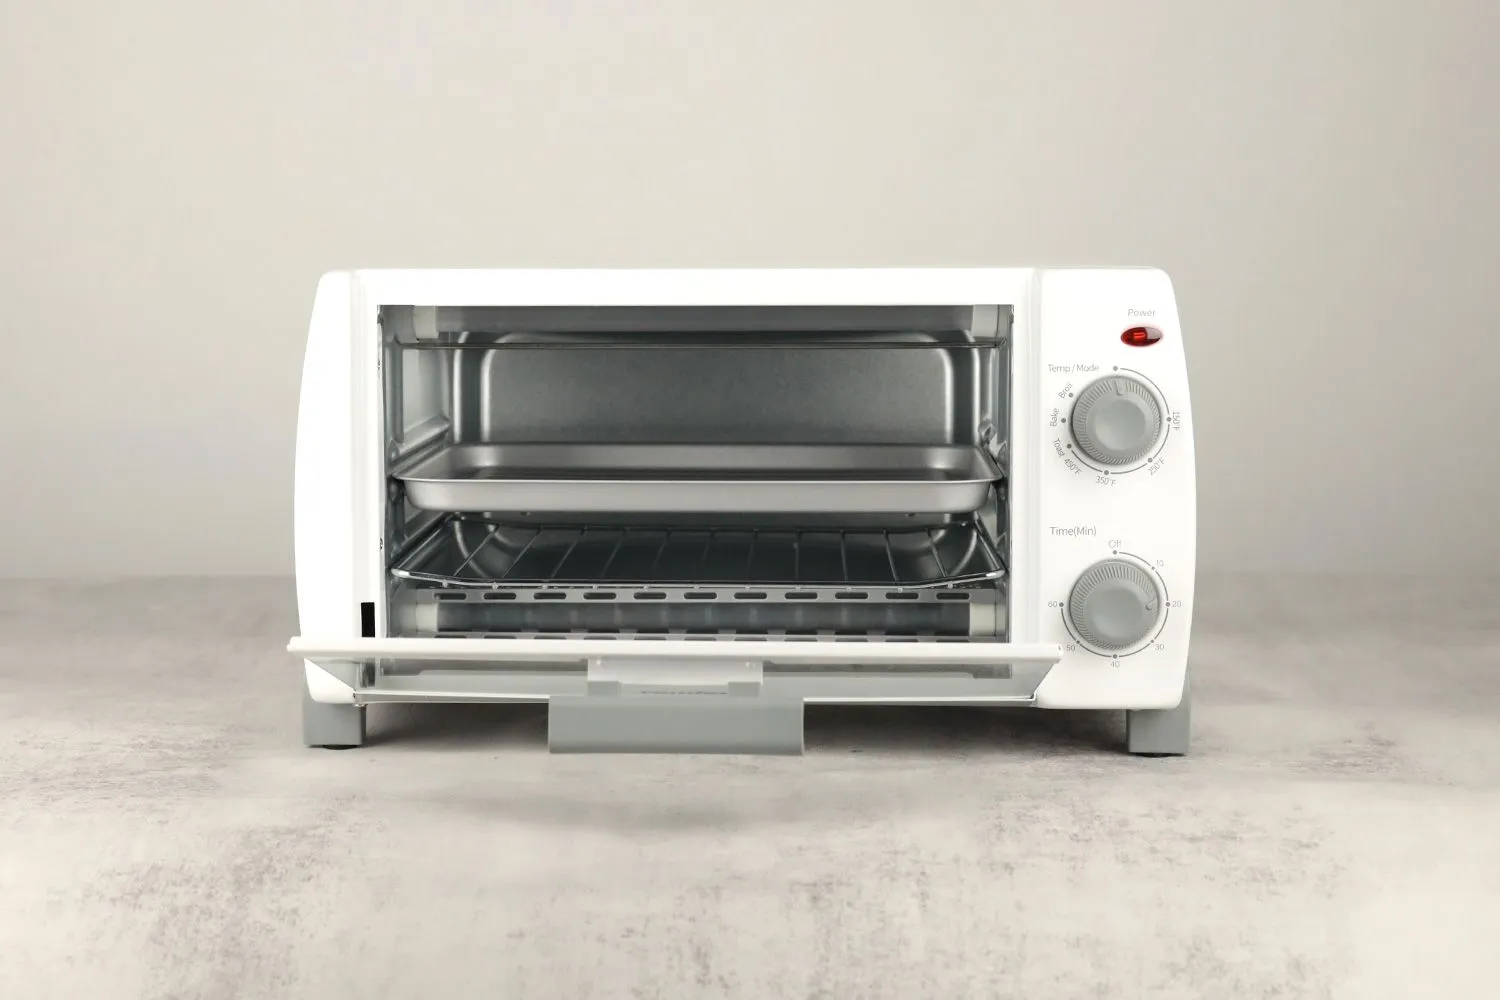  COMFEE' Toaster Oven Countertop, 4-Slice, Compact Size, Easy to  Control with Timer-Bake-Broil-Toast Setting, 1000W, White (CFO-BB102): Home  & Kitchen